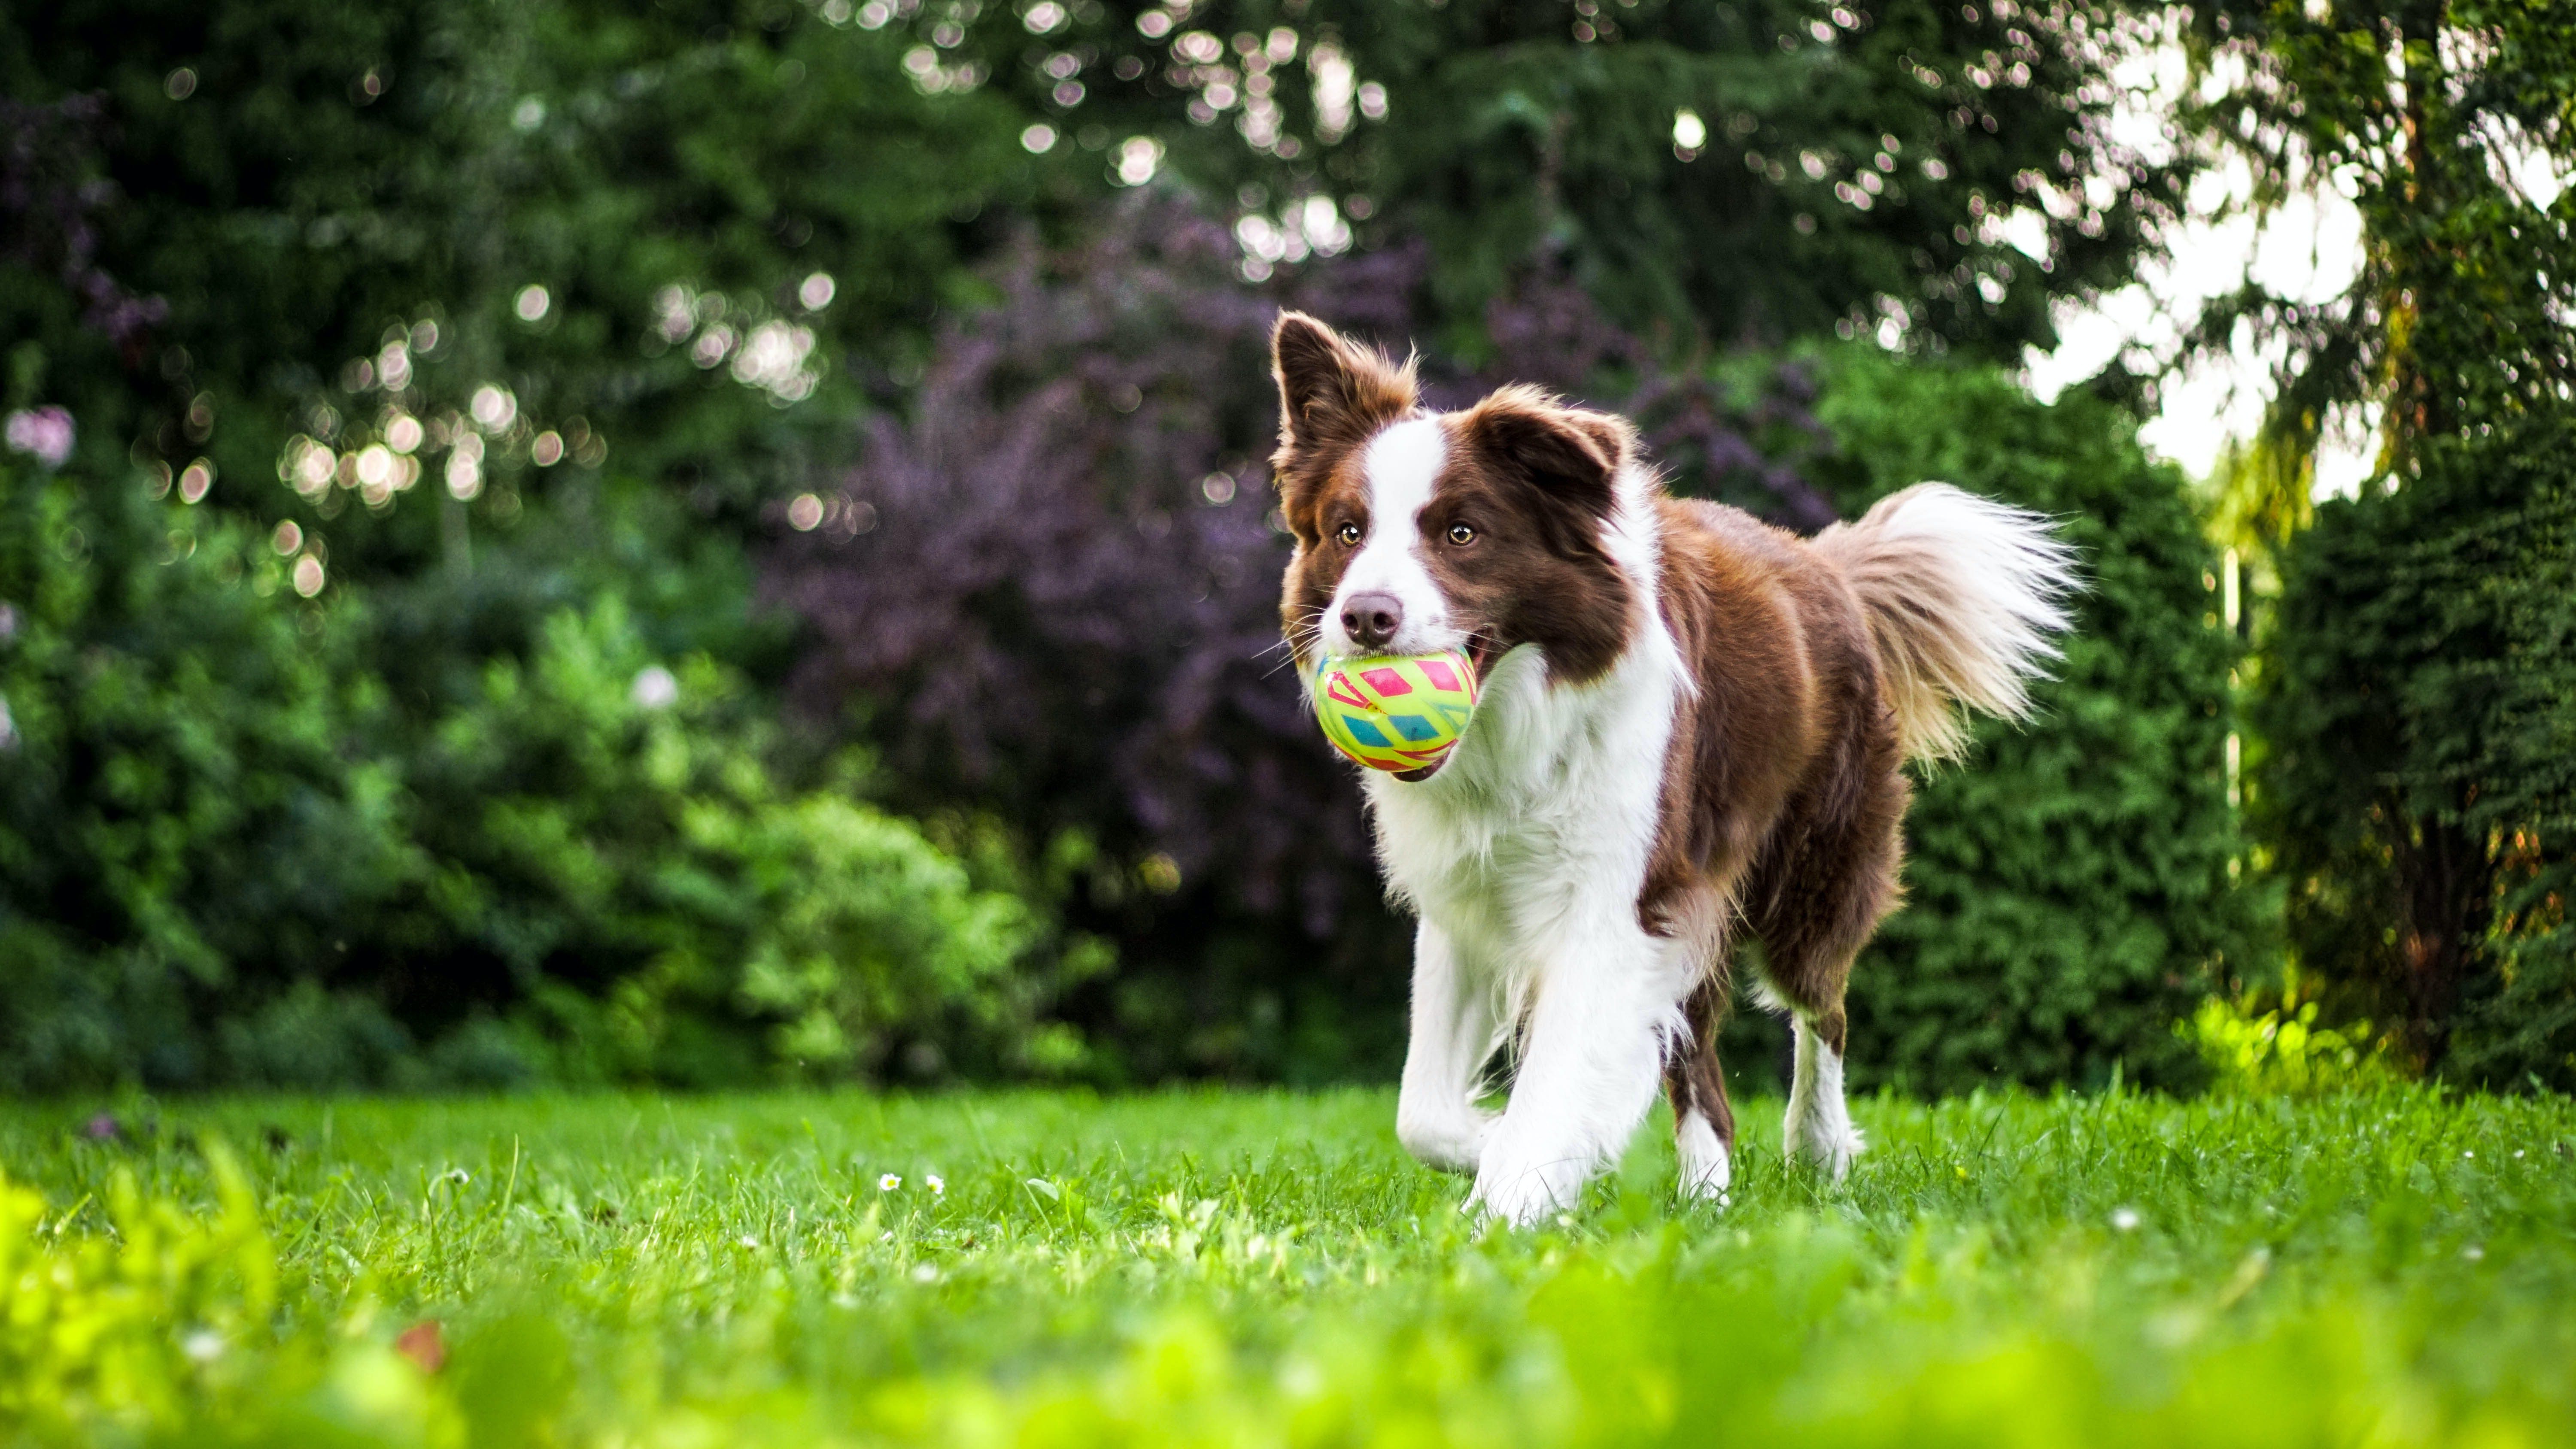 A dog running on grass with a colorful ball